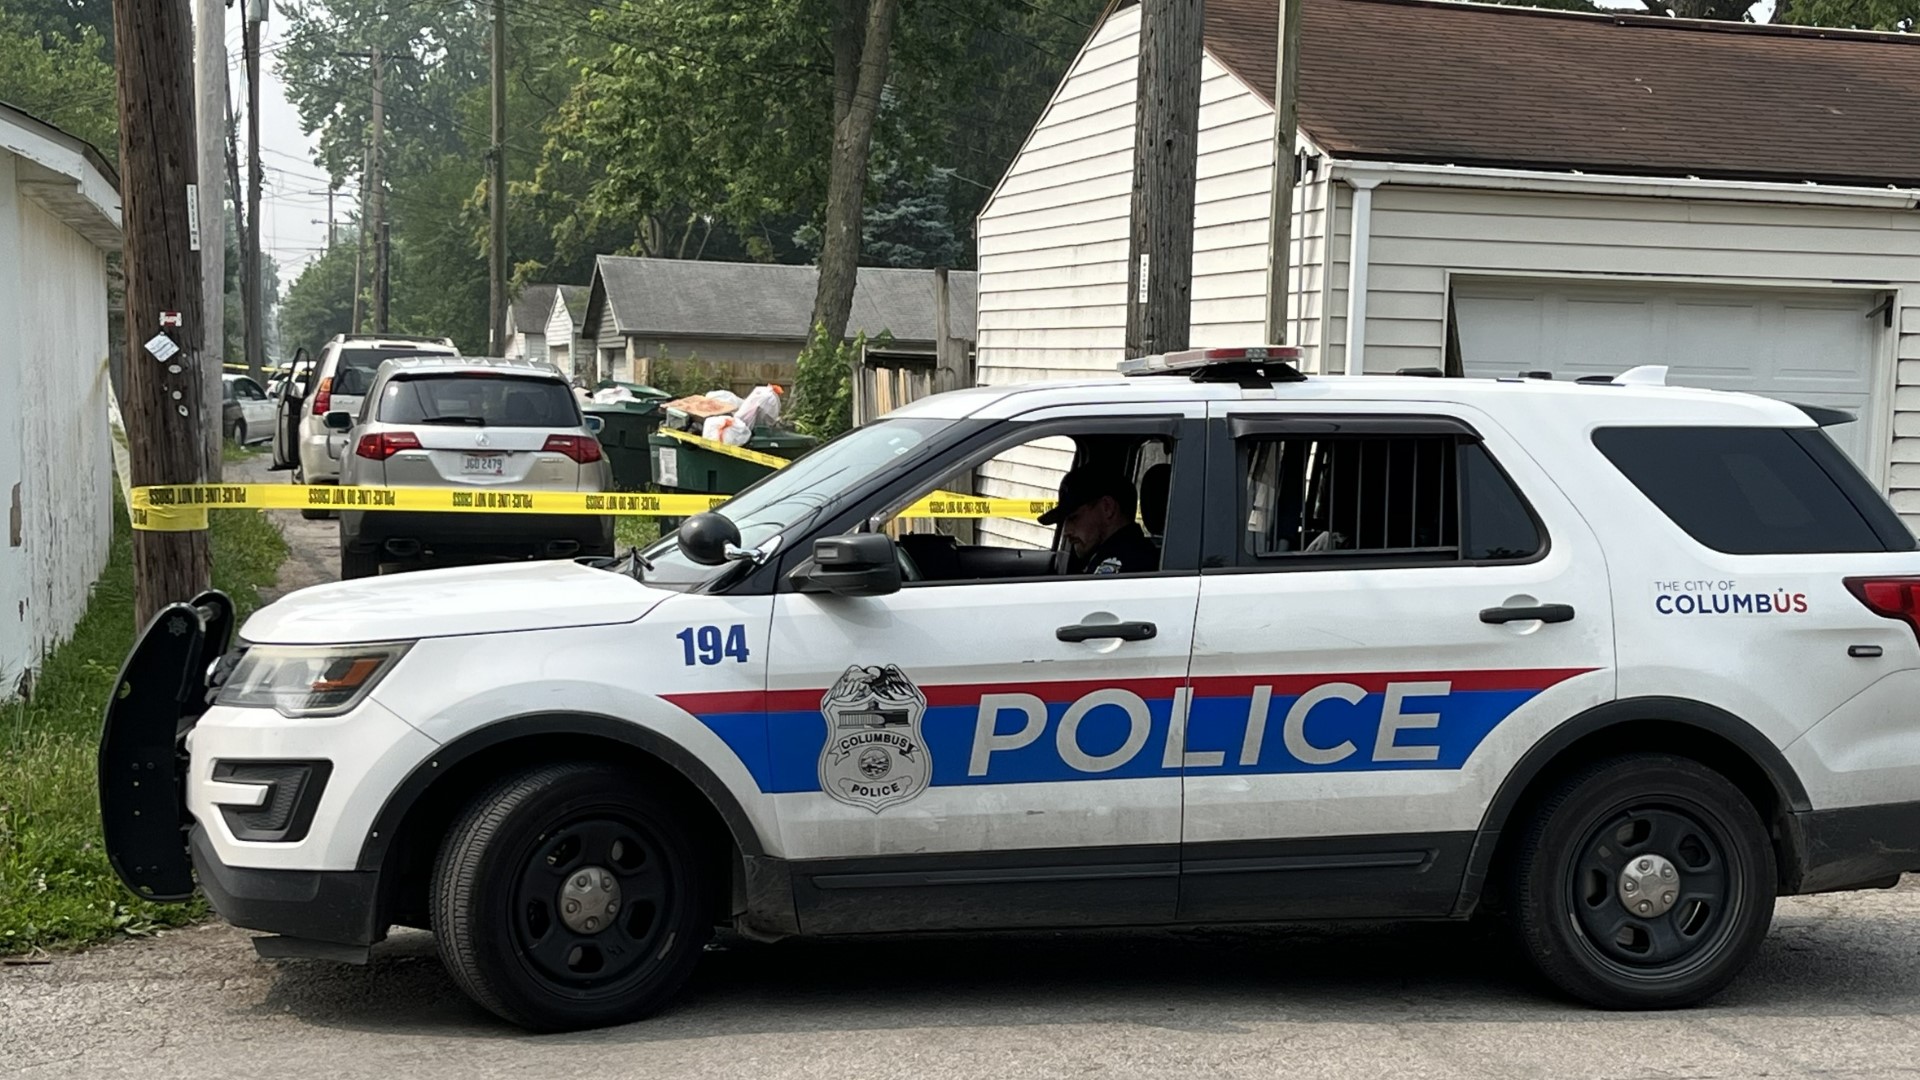 A 29-year-old man was shot Wednesday morning during an altercation after attempting to steal a car in the Hilltop neighborhood, according to Columbus police.